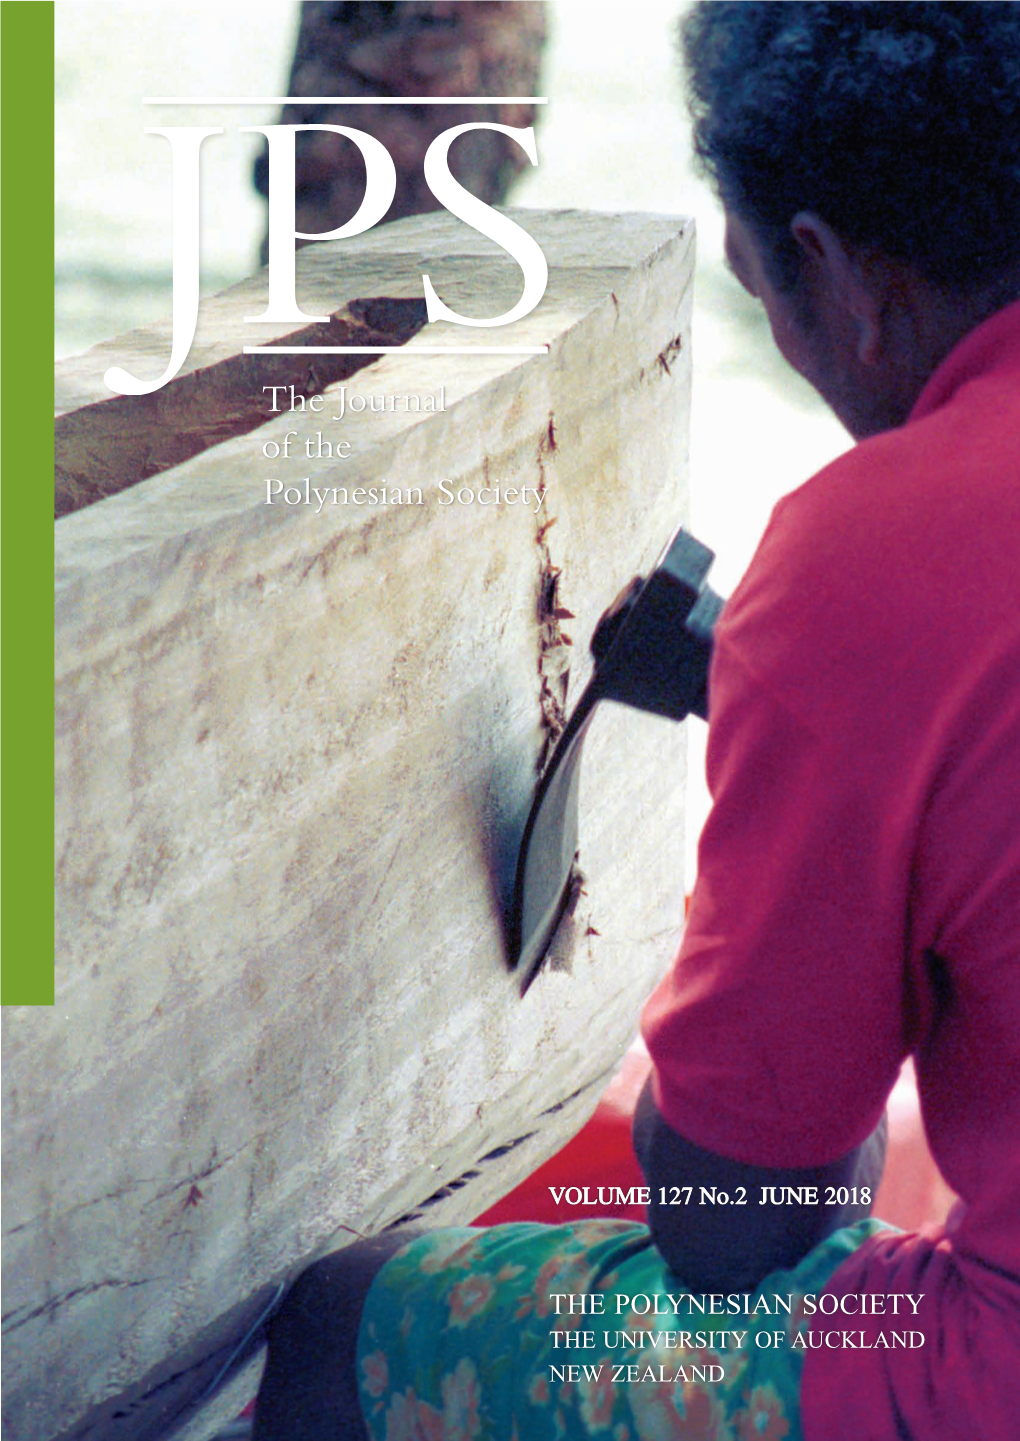 THE JOURNAL of the POLYNESIAN SOCIETY VOLUME 127 No.2 JUNE 2018 the JOURNAL of the POLYNESIAN SOCIETY